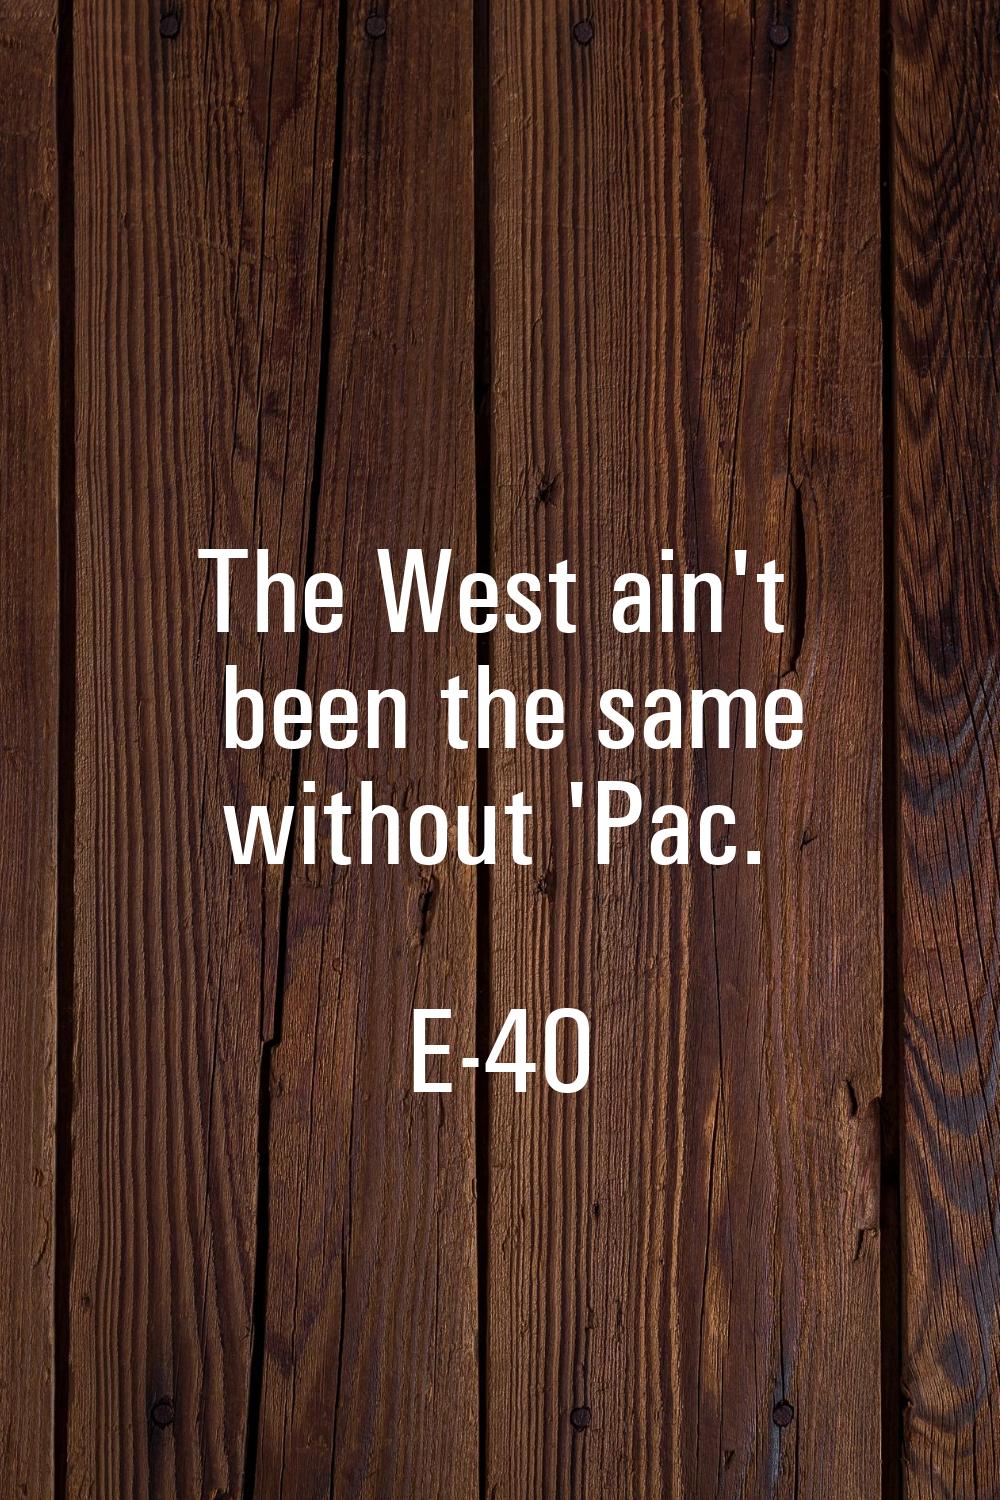 The West ain't been the same without 'Pac.